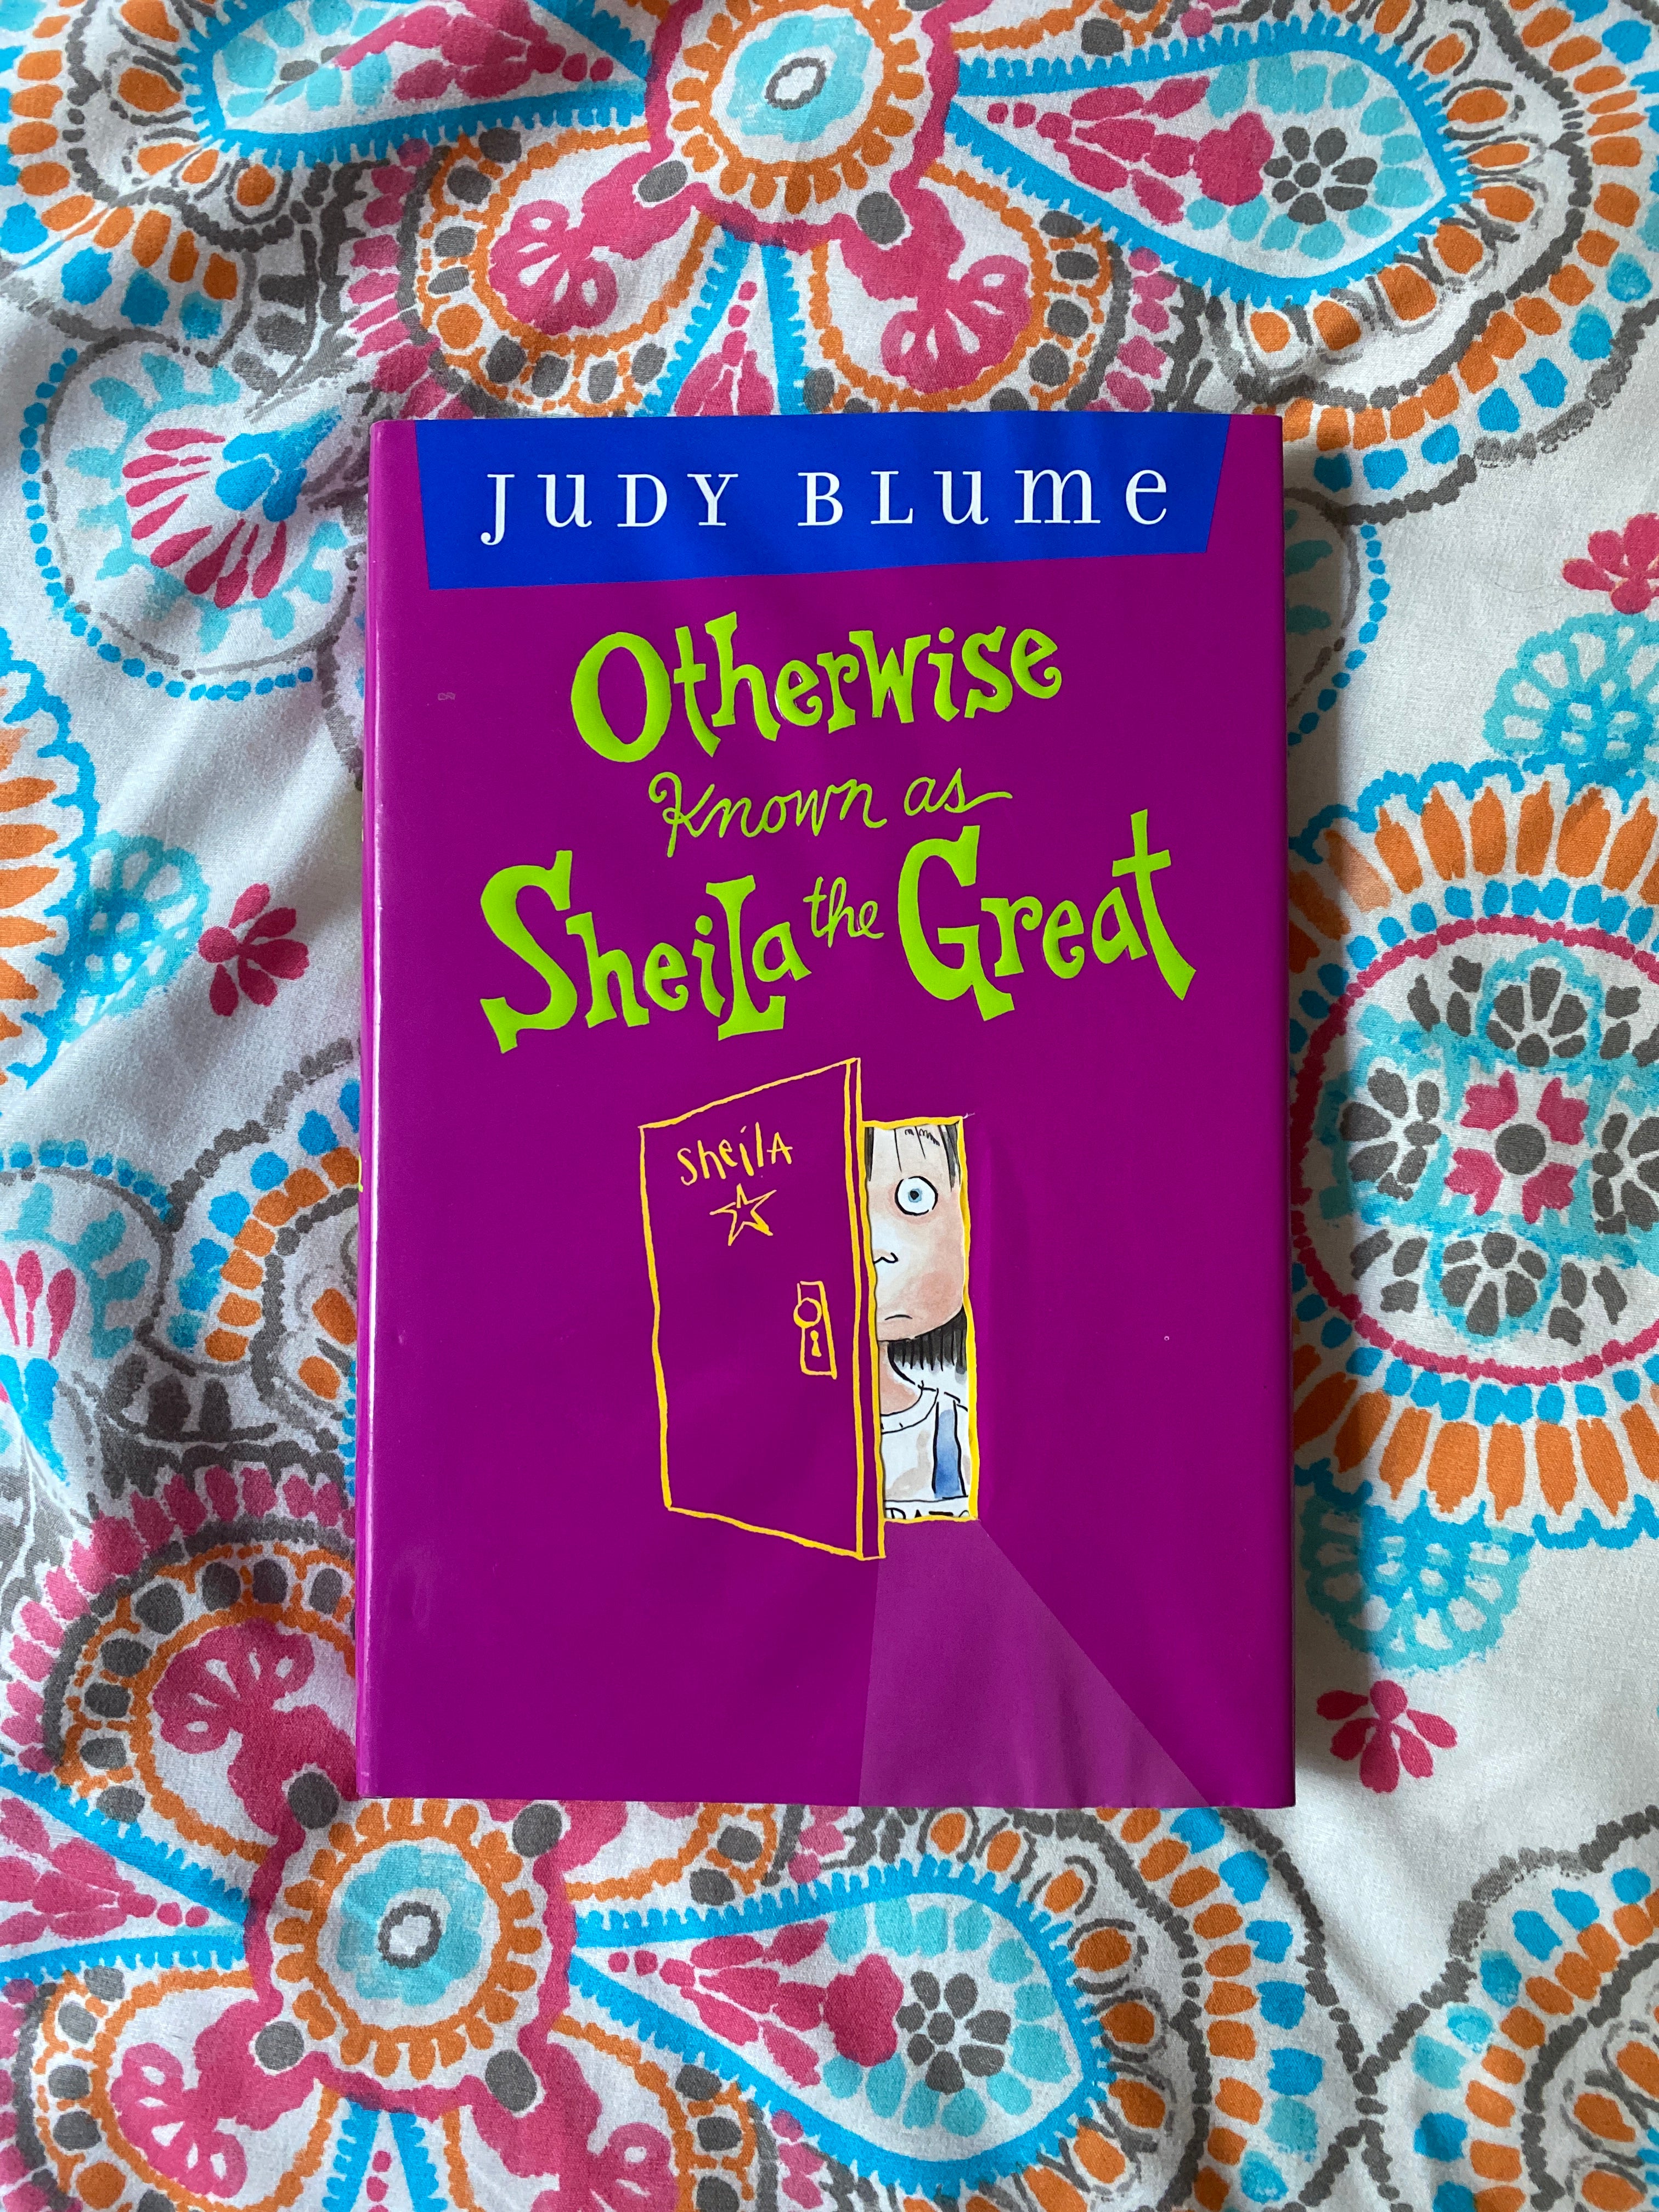 Hardcover　by　the　Great　Judy　Blume,　Known　Otherwise　Sheila　As　Pangobooks